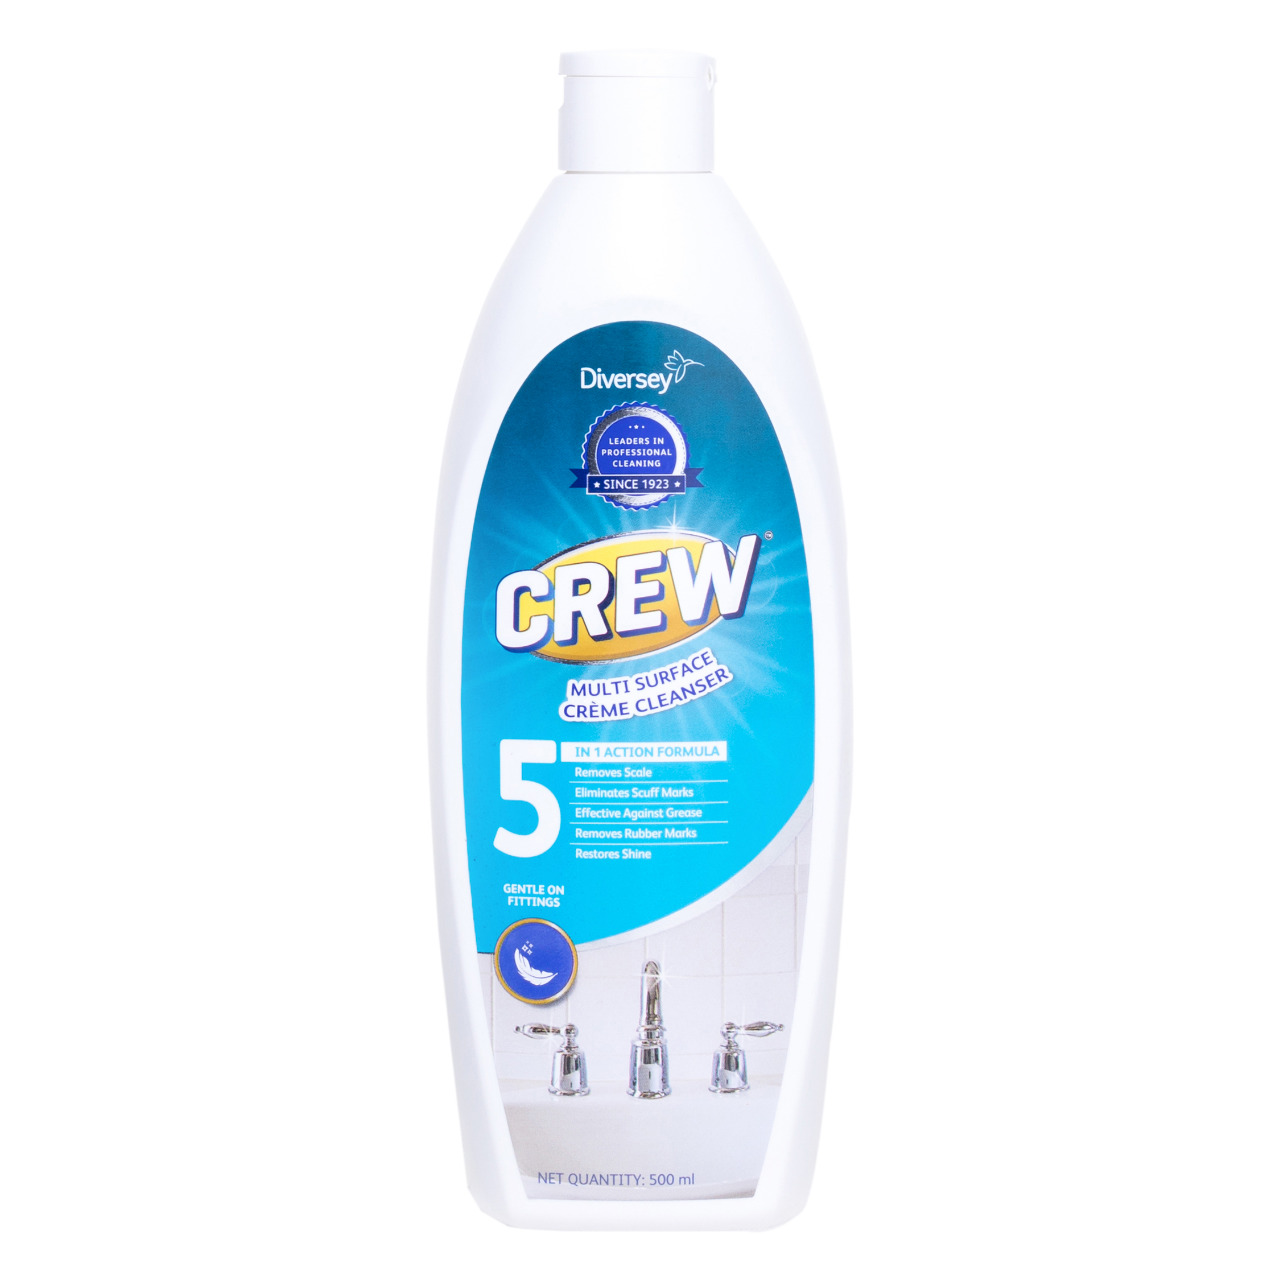 Crew Multi Surface Cleaner - 500 ml